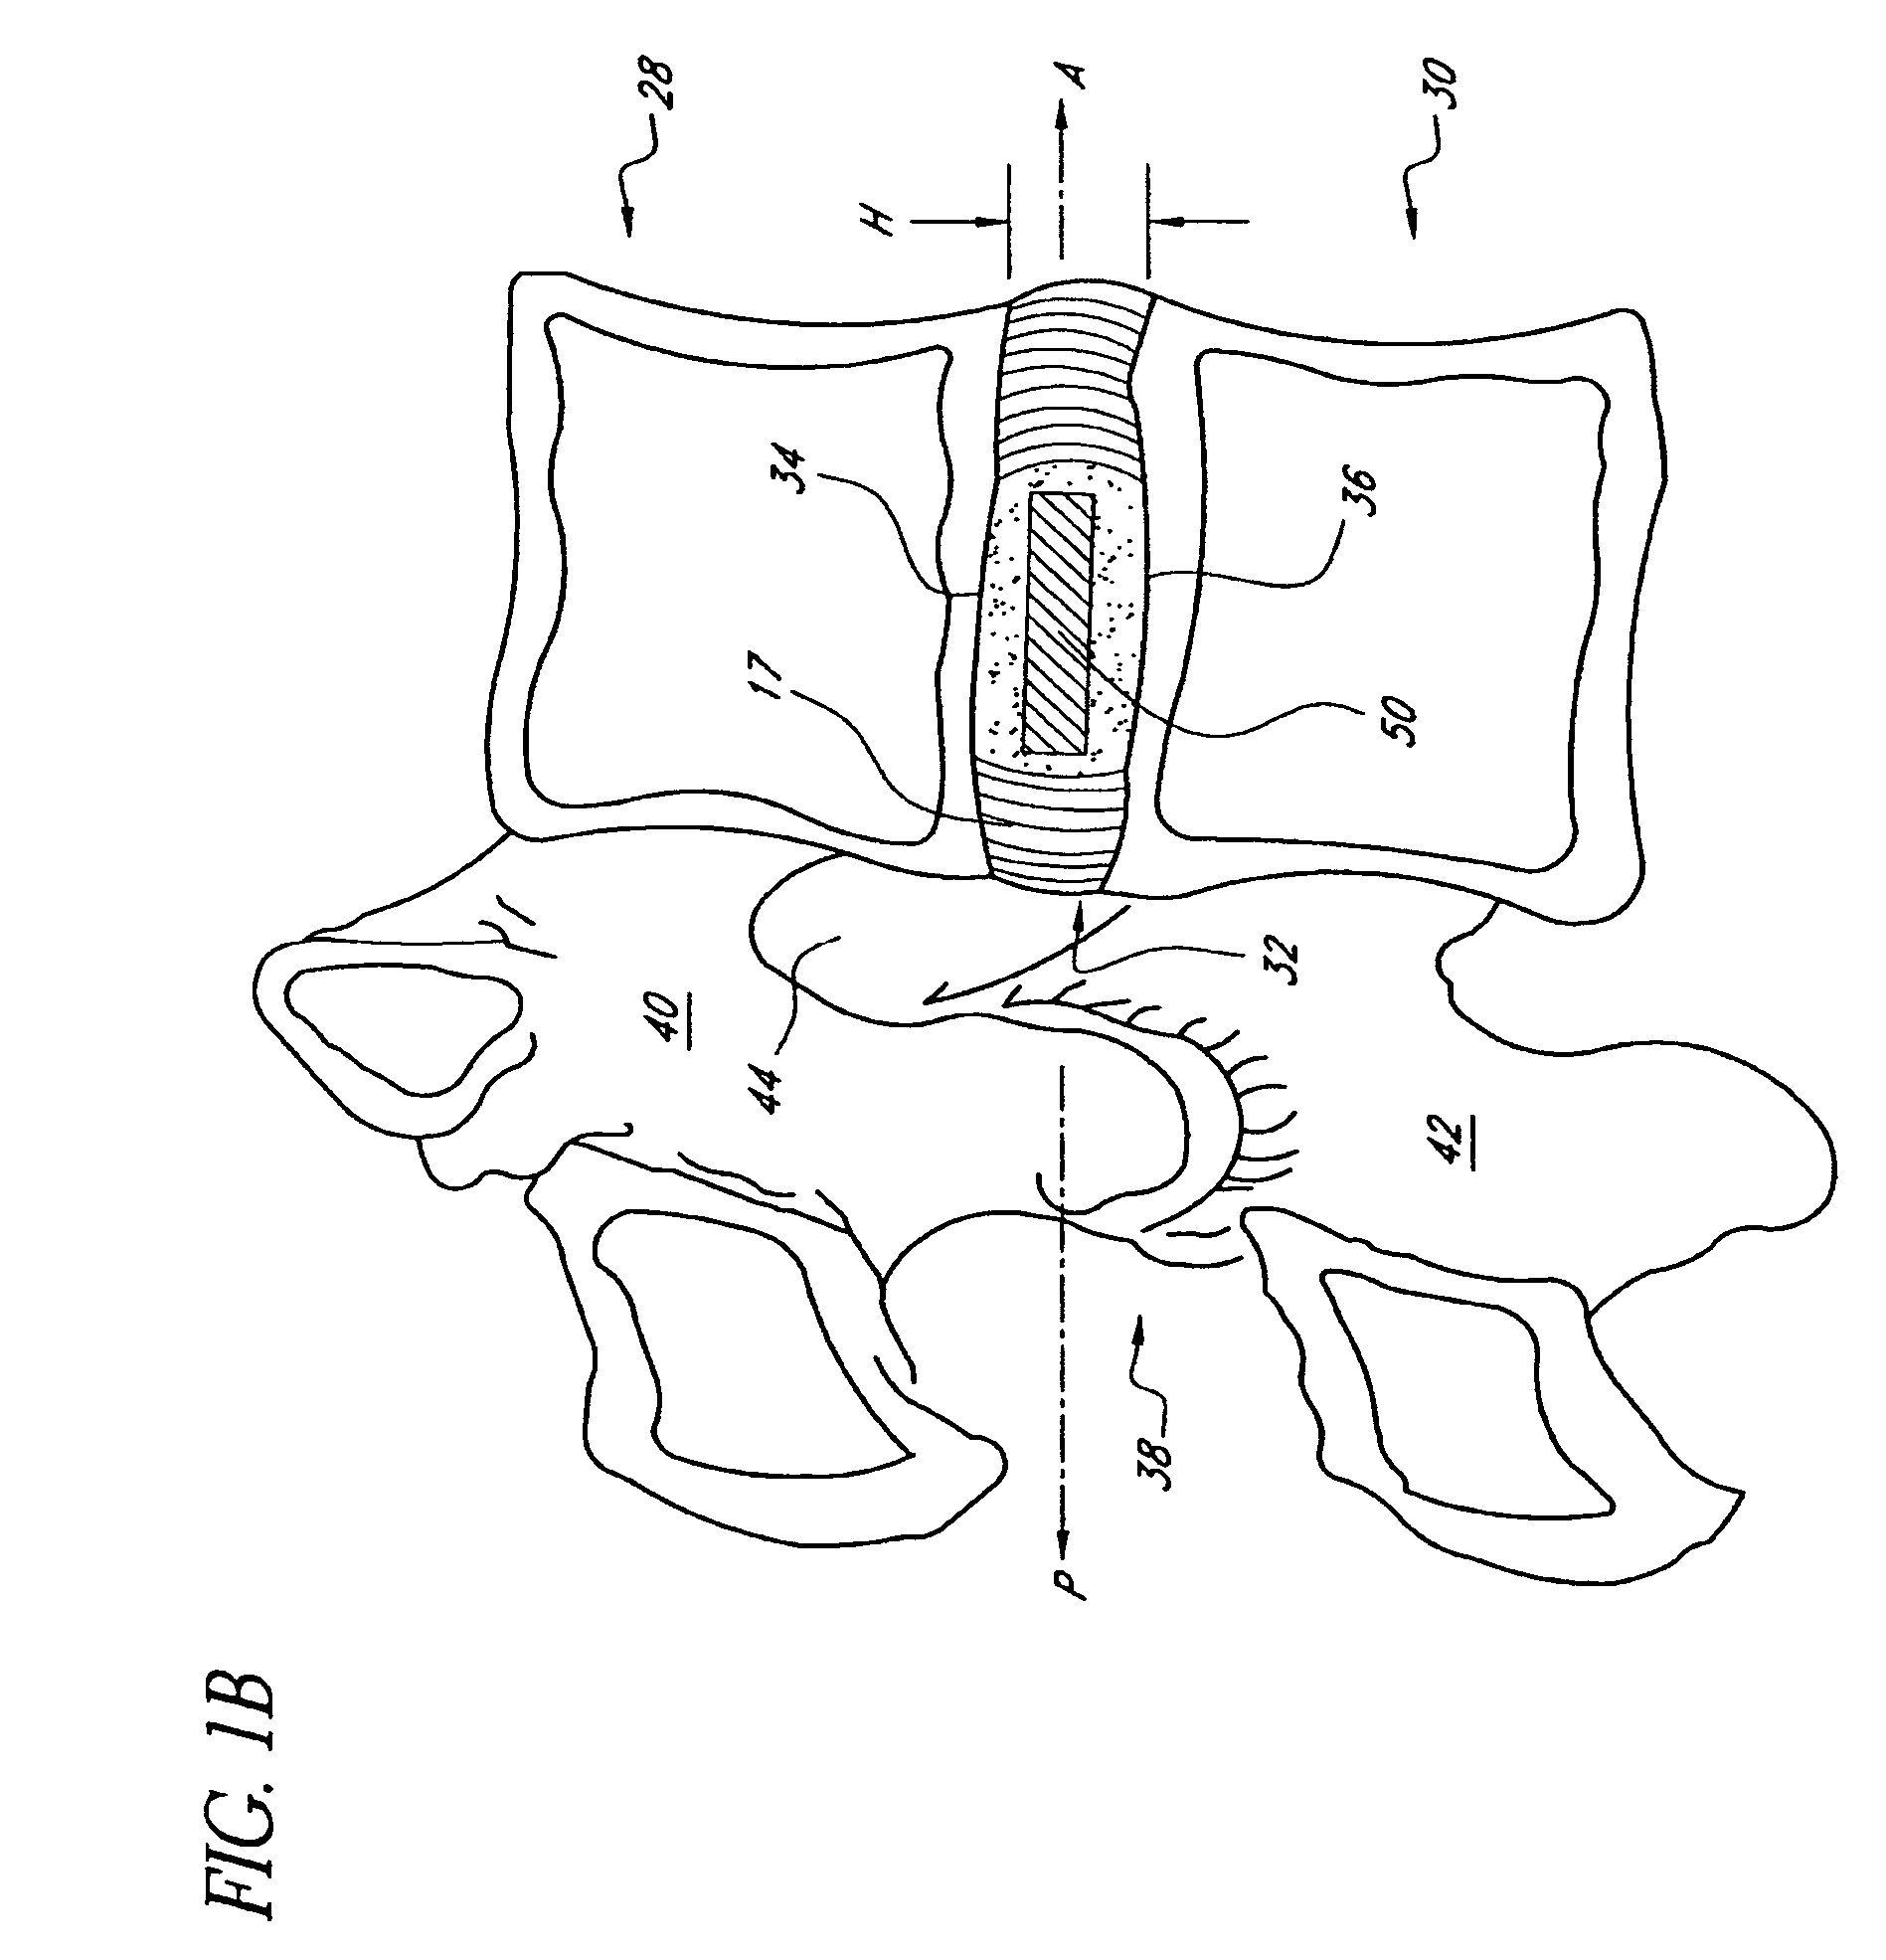 Method of treating a herniated disc